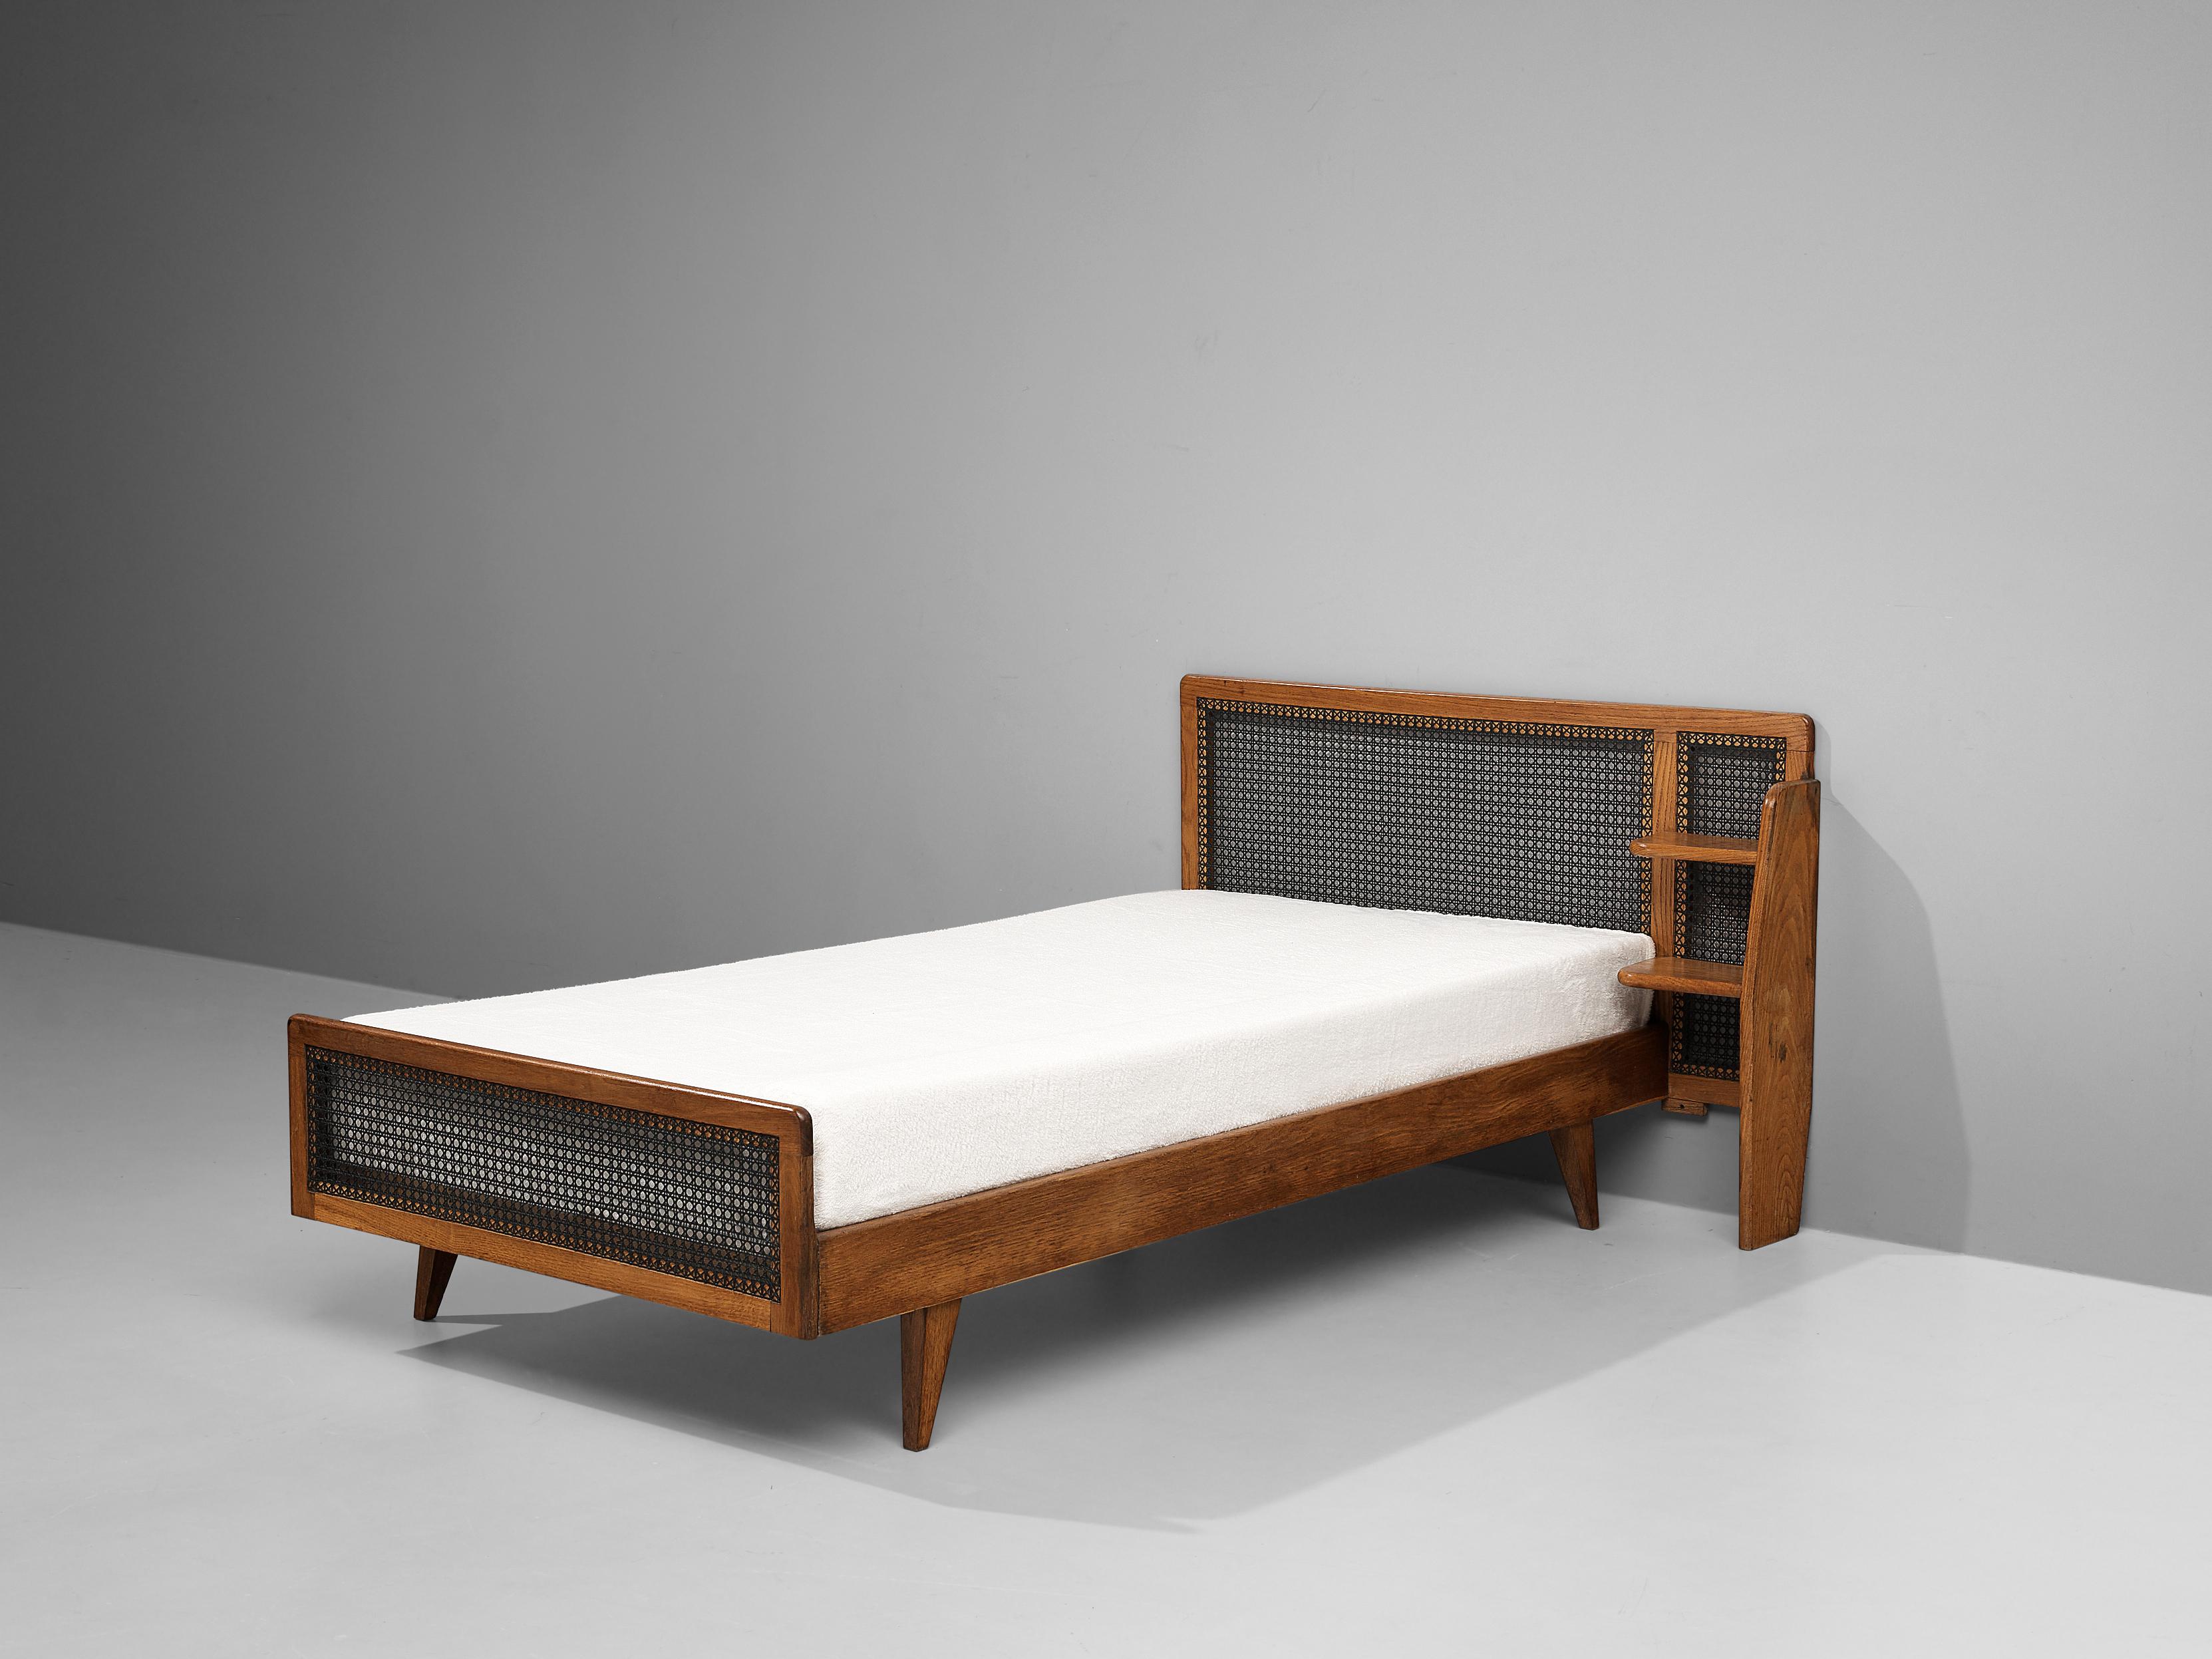 Roger Landault, single bed, oak and cane, France, 1950s

French Post-War Reconstruction single bed designed by Roger Landault. The bed is made of oak and features a headboard and footboard decorated with cane. Shelving forms an integrated nightstand